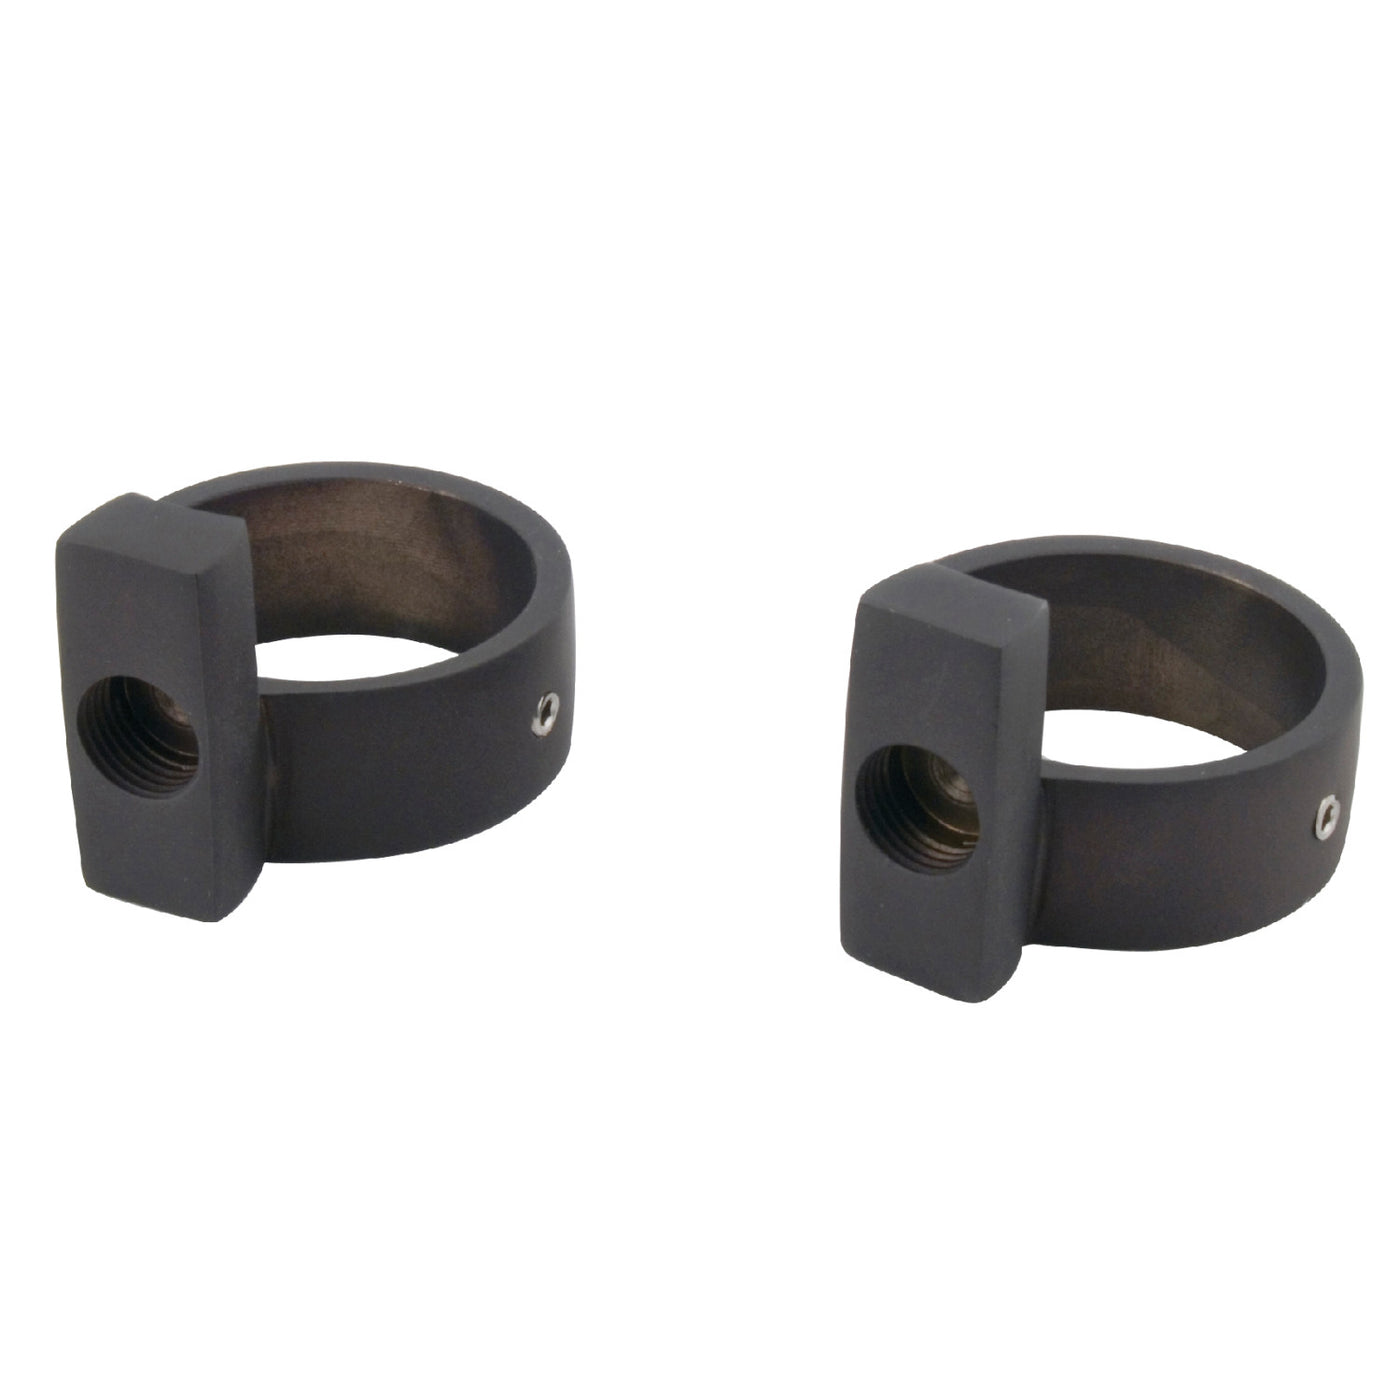 Elements of Design DS435 Drain Bracelets for Supply Line Support from CC455, Oil Rubbed Bronze